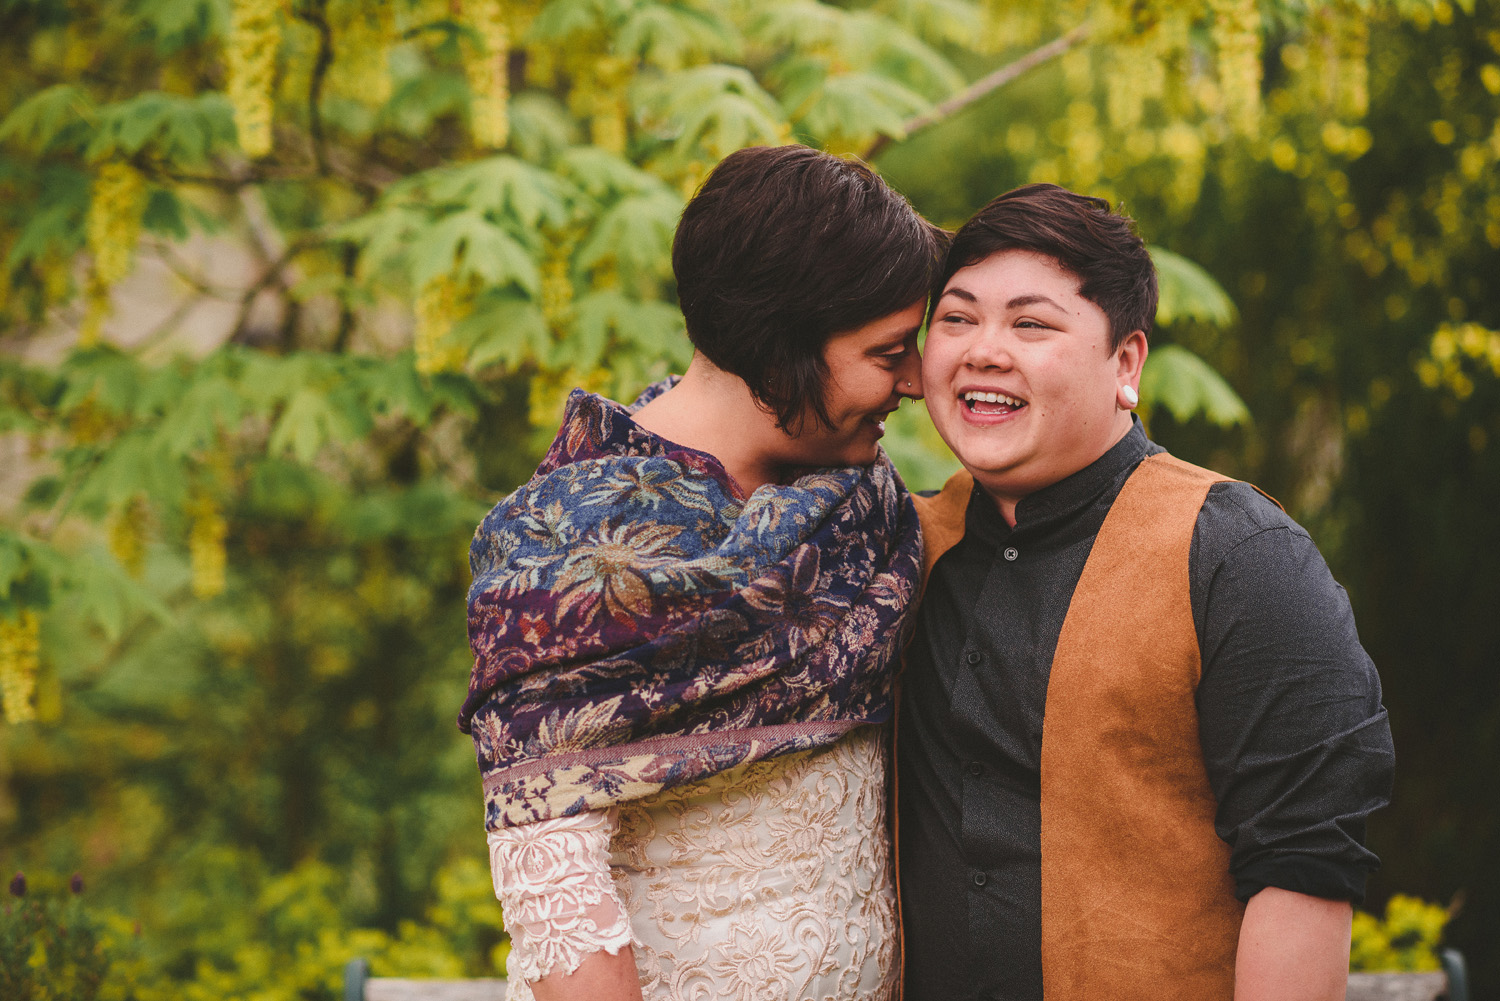 lgbtq jewish pagan metis wedding at sea breeze lodge on hornby island couple smiling together